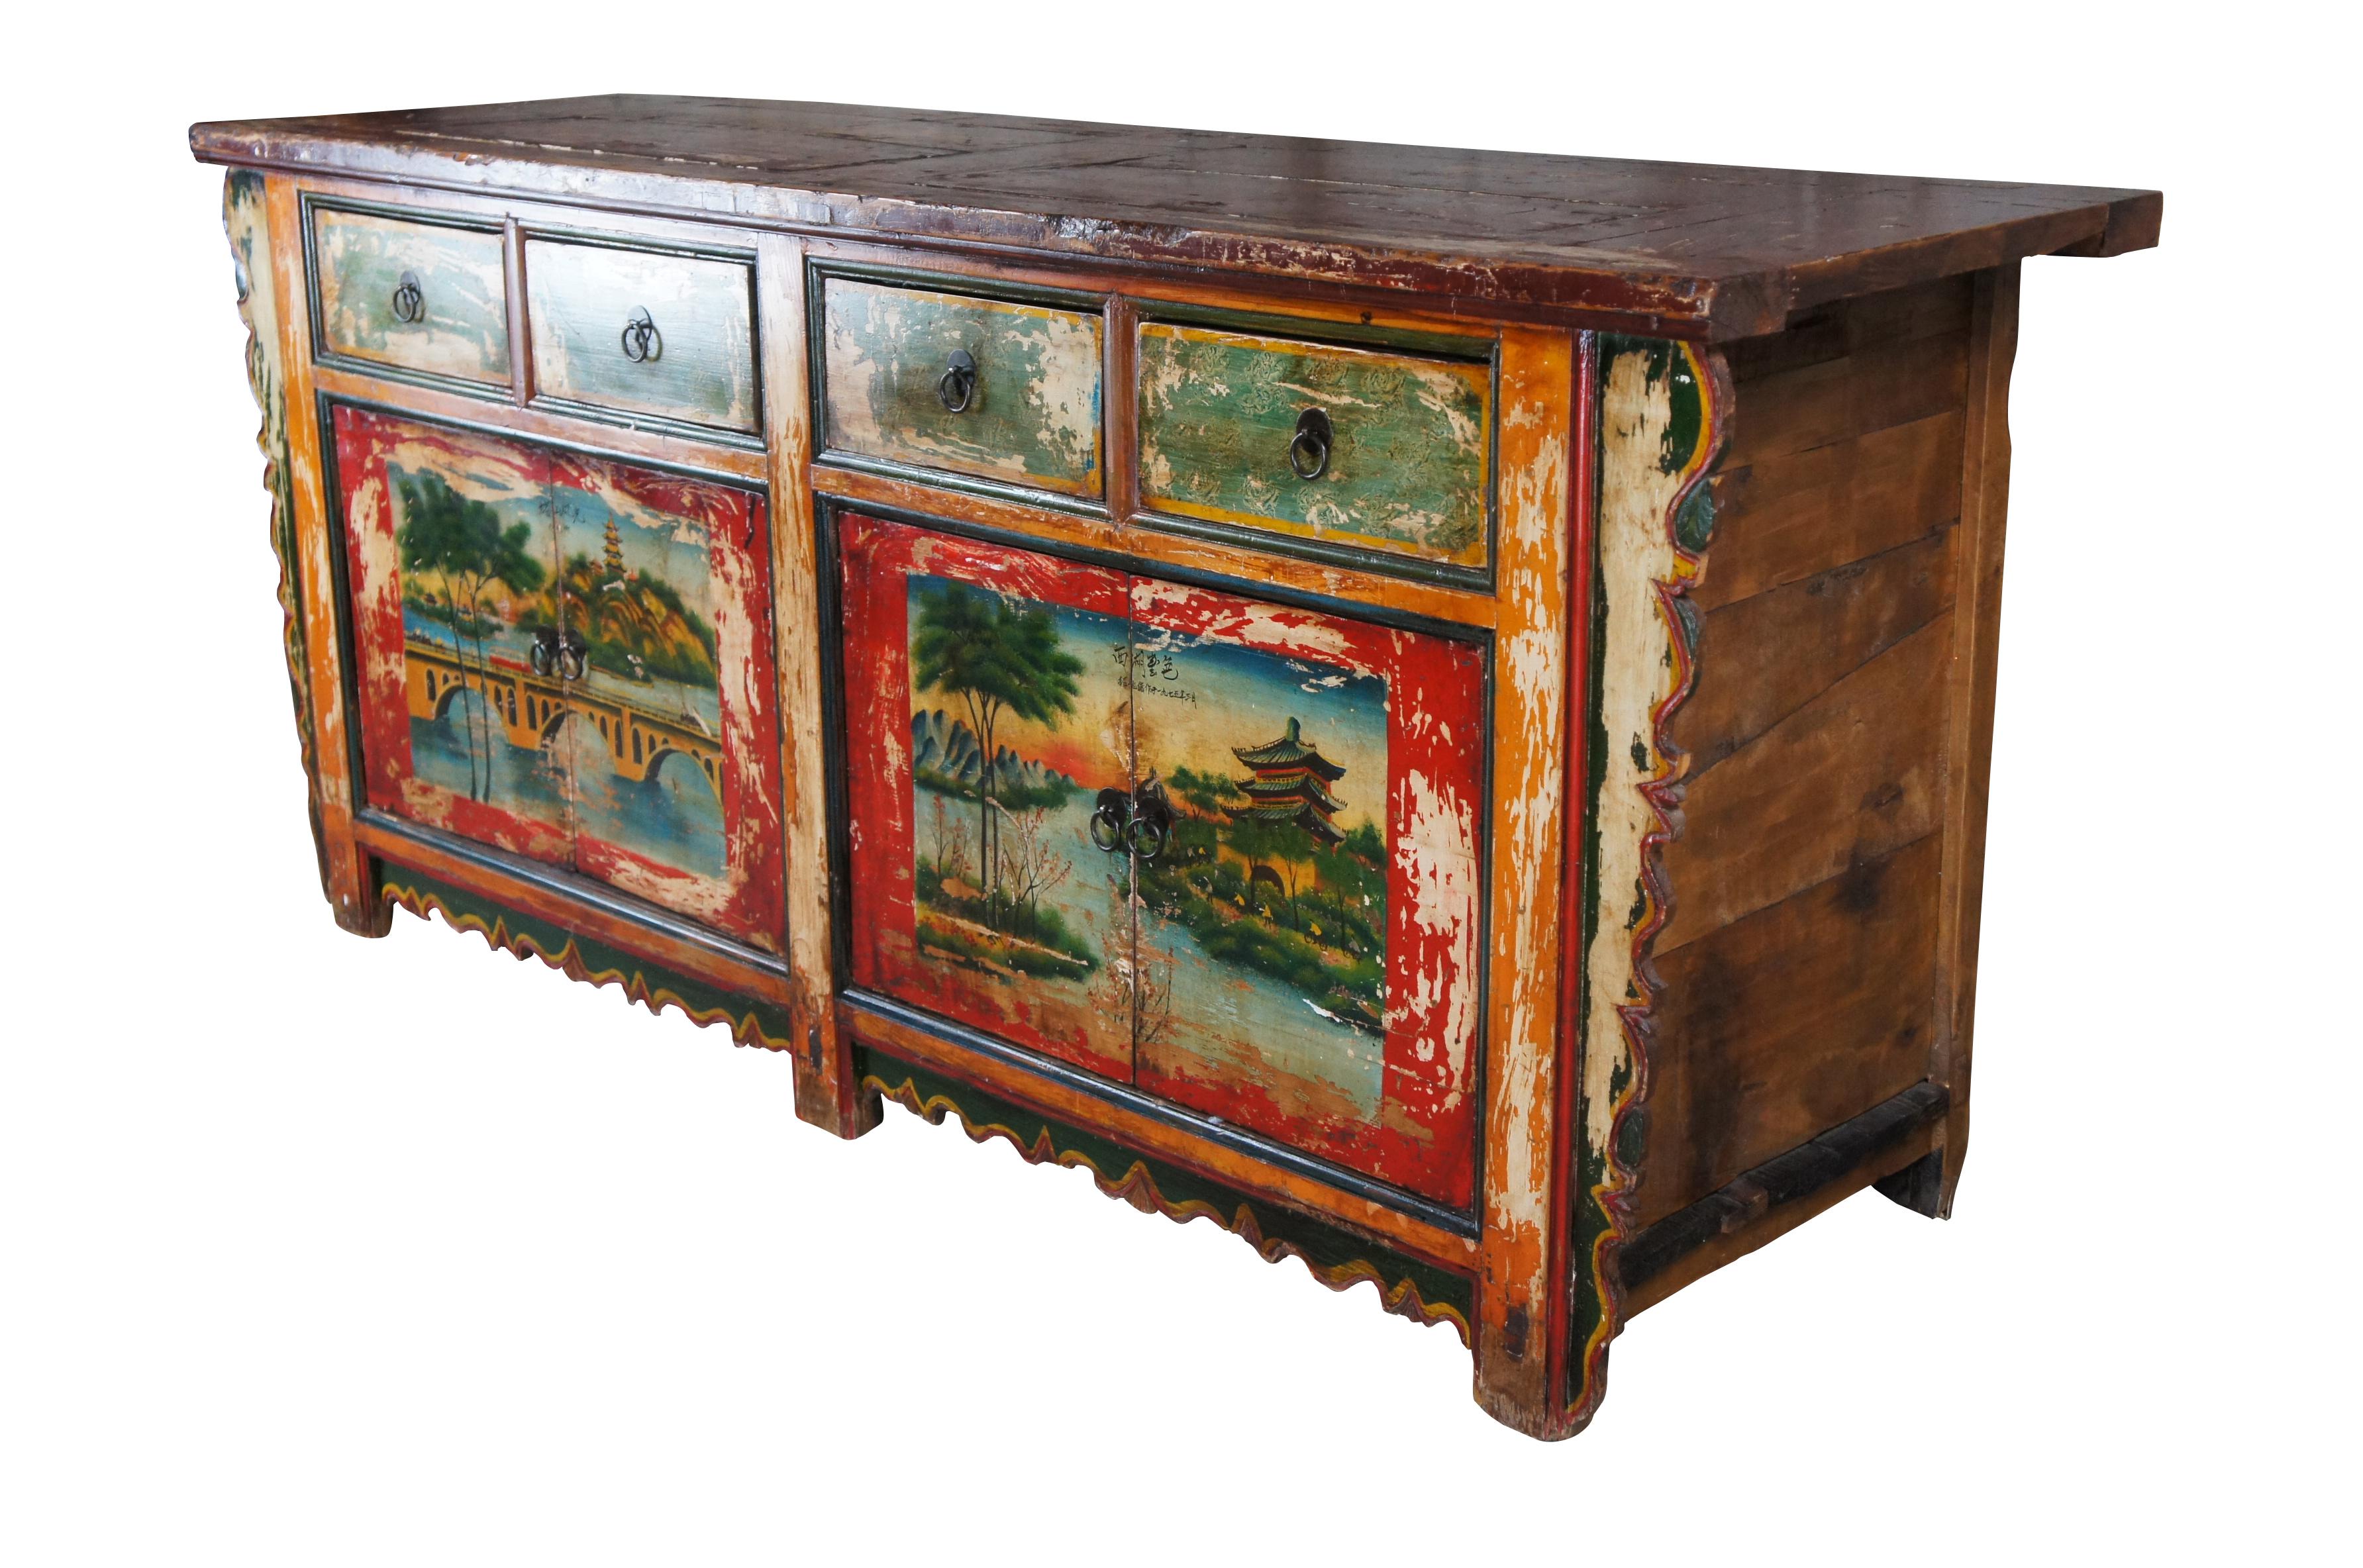 Vintage Mongolian / Chinese sideboard cabinet or console. Made of Elm featuring rectangular form with scalloped accents and four drawers, two cabinets and a painted and lacquered exterior that features the landscape of two cities. 

One side